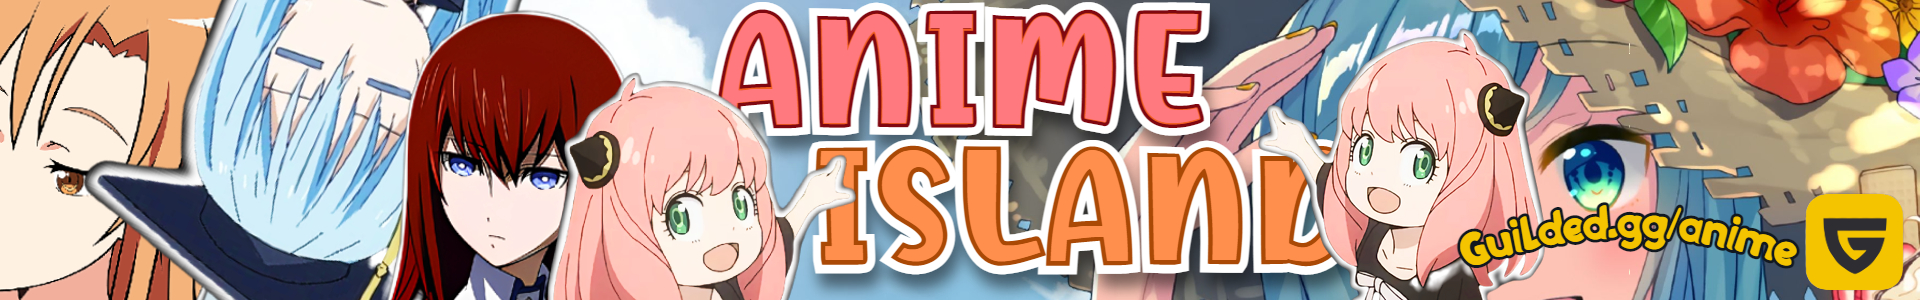 Anime Island - Guilded